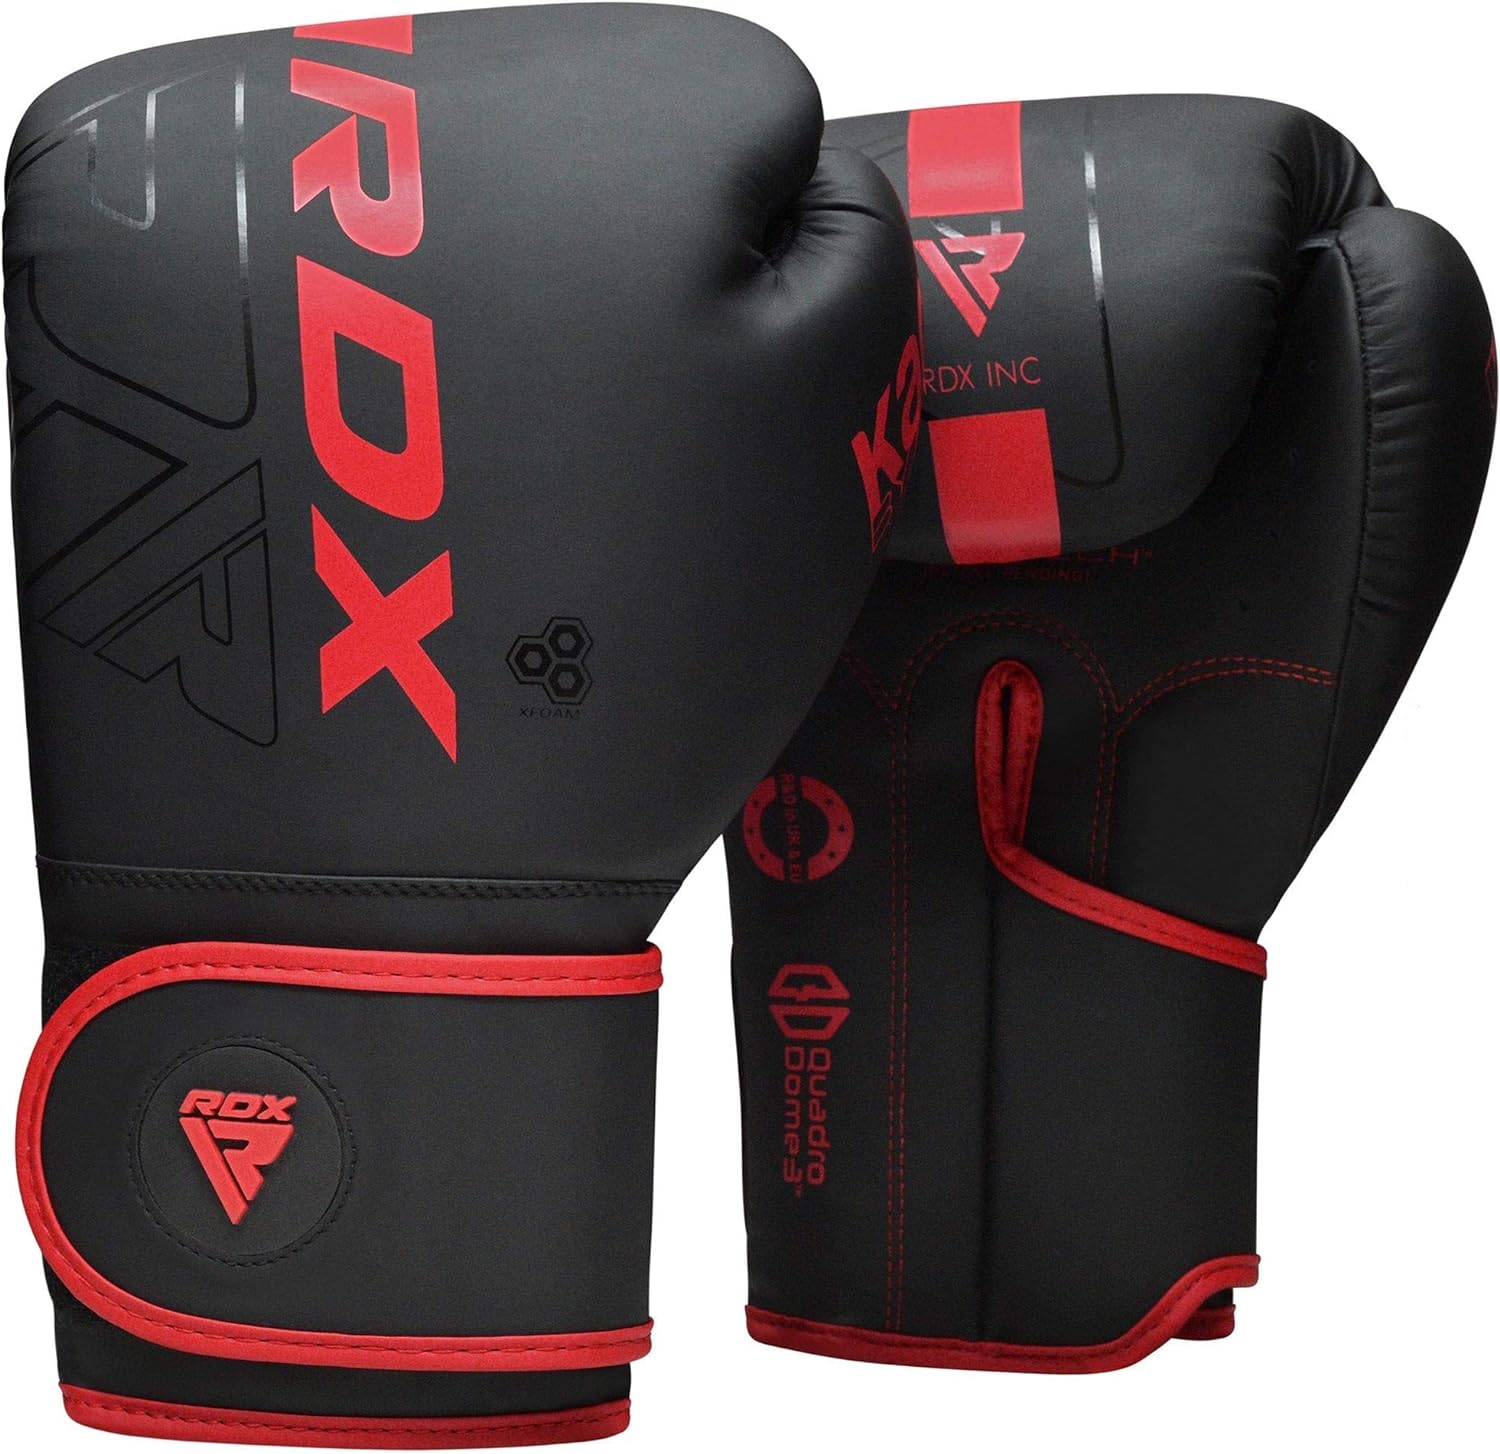 Eclipse Martial Art Supplies Training Gloves RED / 10 OZ RDX Boxing Gloves Men Women, Pro Training Sparring, Maya Hide Leather Muay Thai MMA Kickboxing, Adult Heavy Punching Bag Gloves Mitts Focus Pad Workout, Ventilated Palm